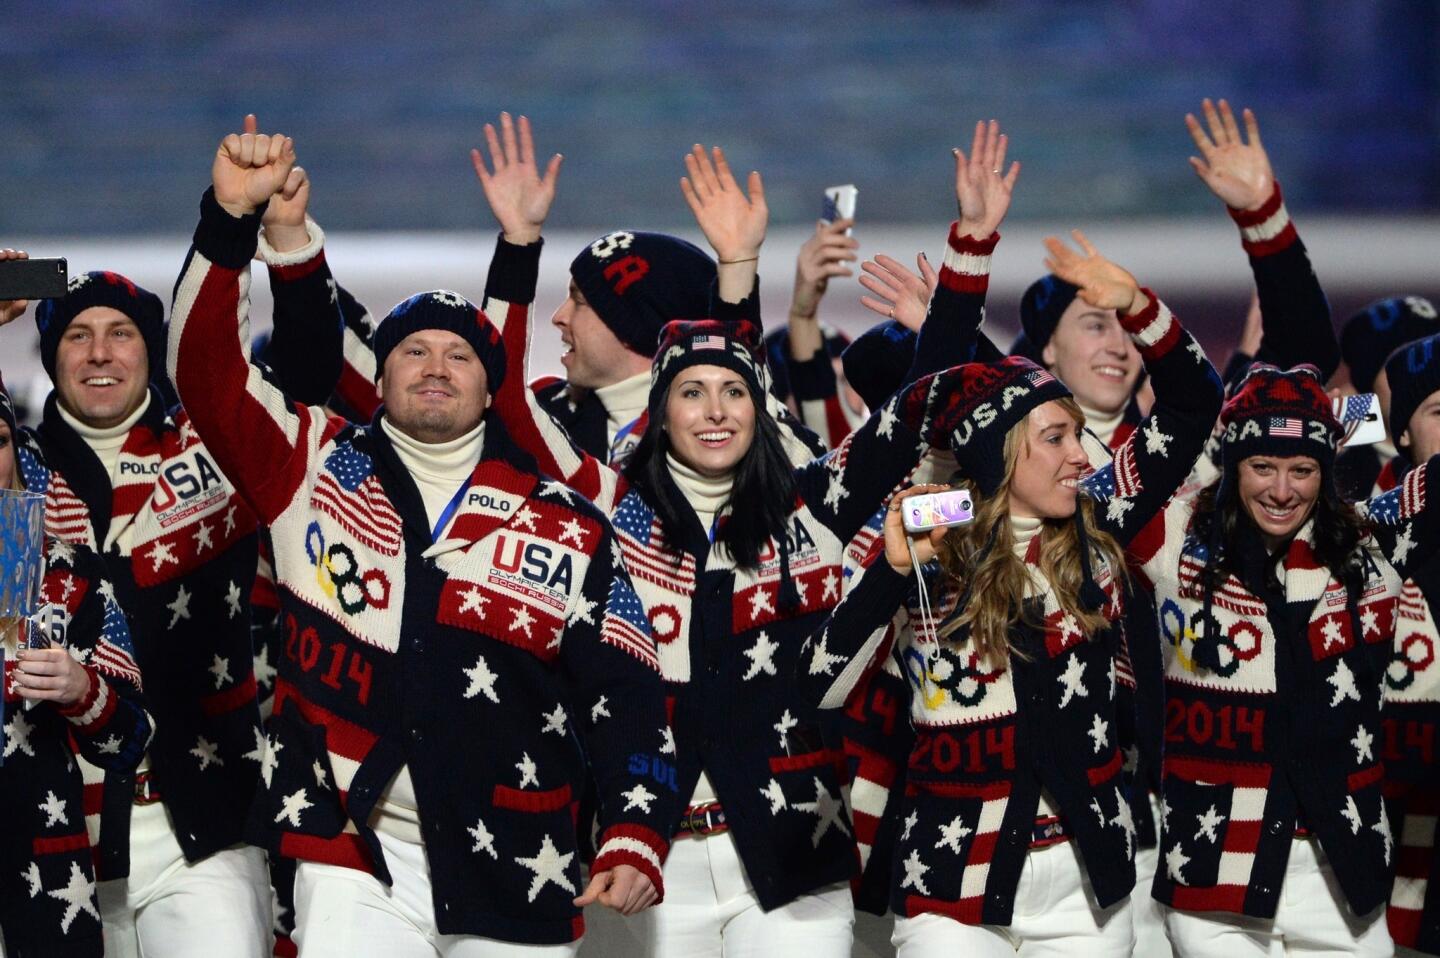 Olympic athletes from the United States wear sweaters designed by Ralph Lauren in the opening ceremony.